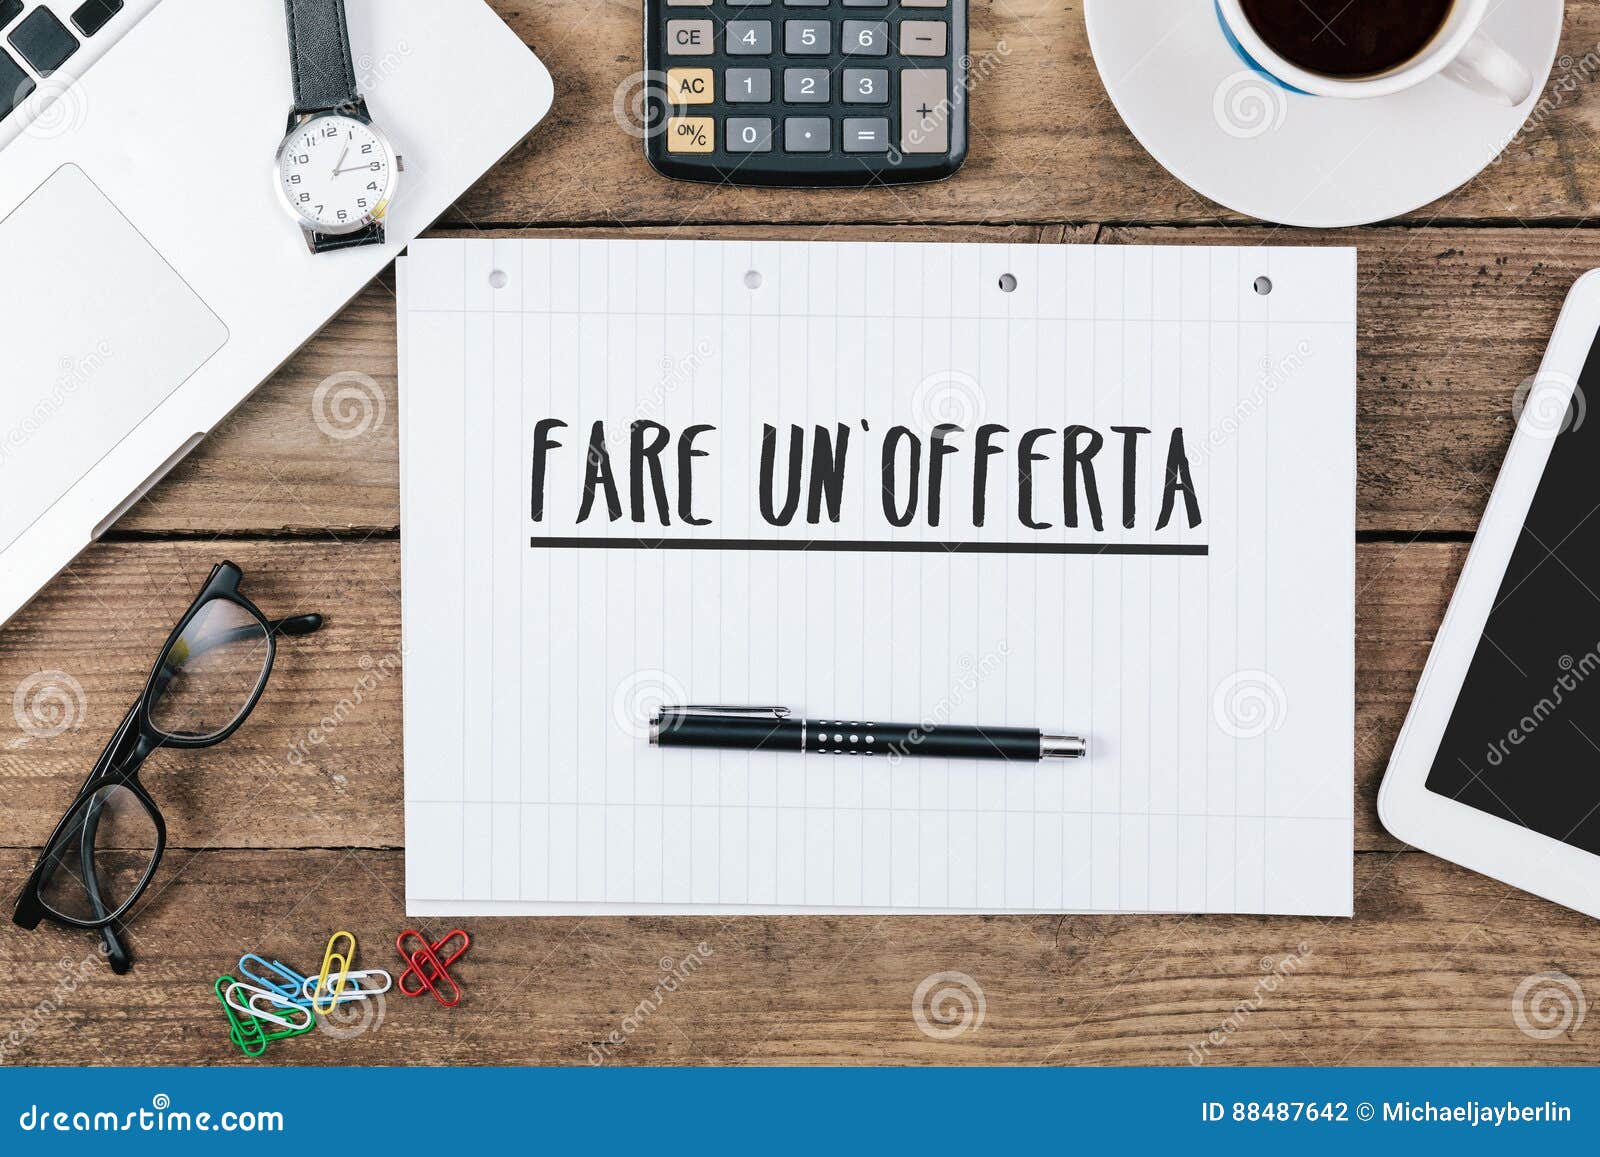 fare un`offerta, italian text for make an offer on note pad at o